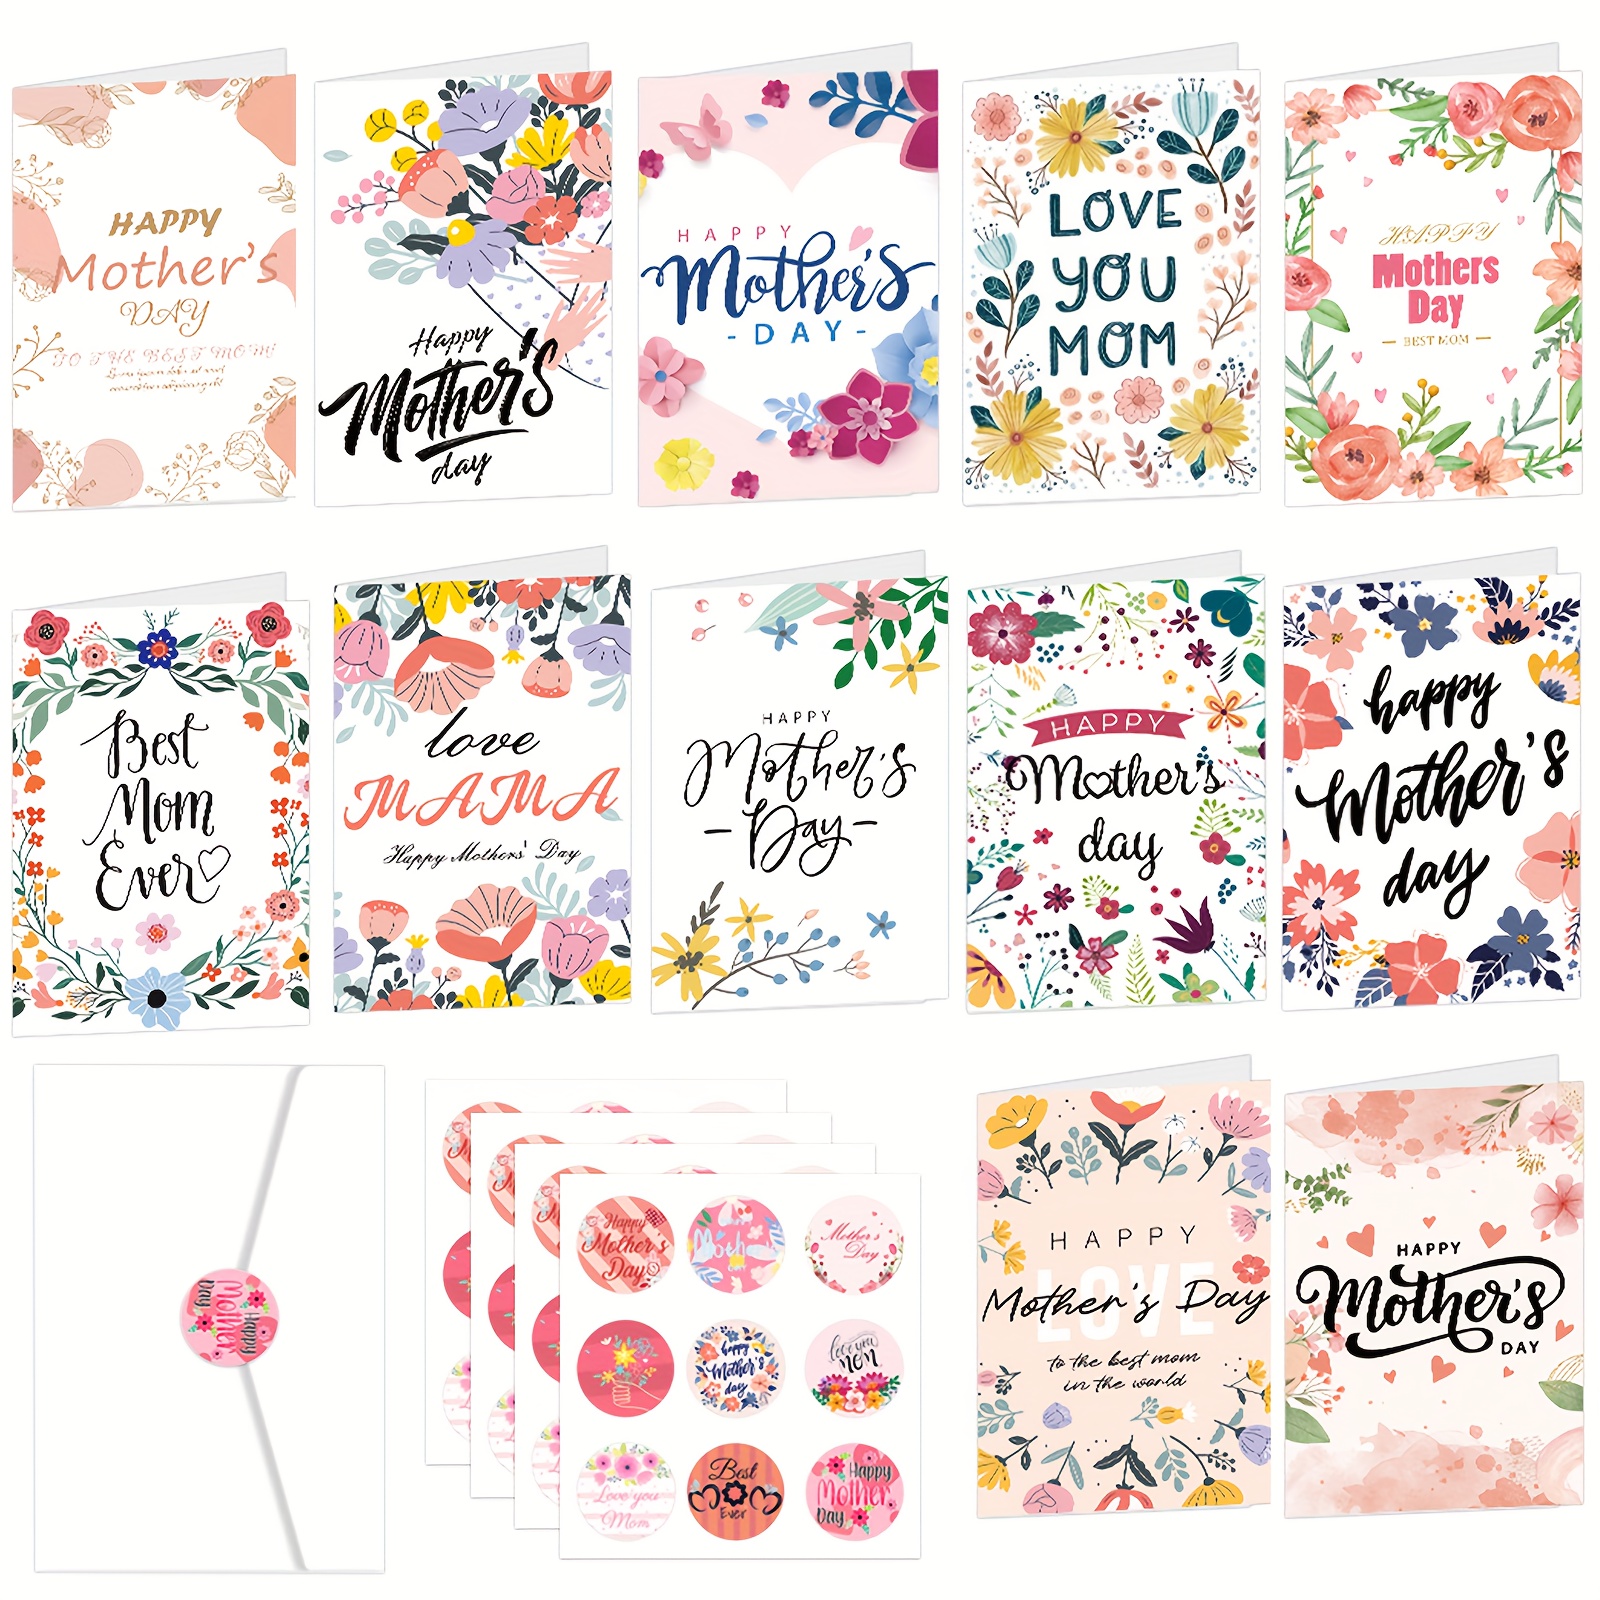 

84 Pcs Happy Mother's Day Cards Set, Included 24 Pcs Mother's Day Cards, 24 Pcs Envelopes & 36 Pcs Stickers, Mother Day Card With Envelope Stickers For Mother Day